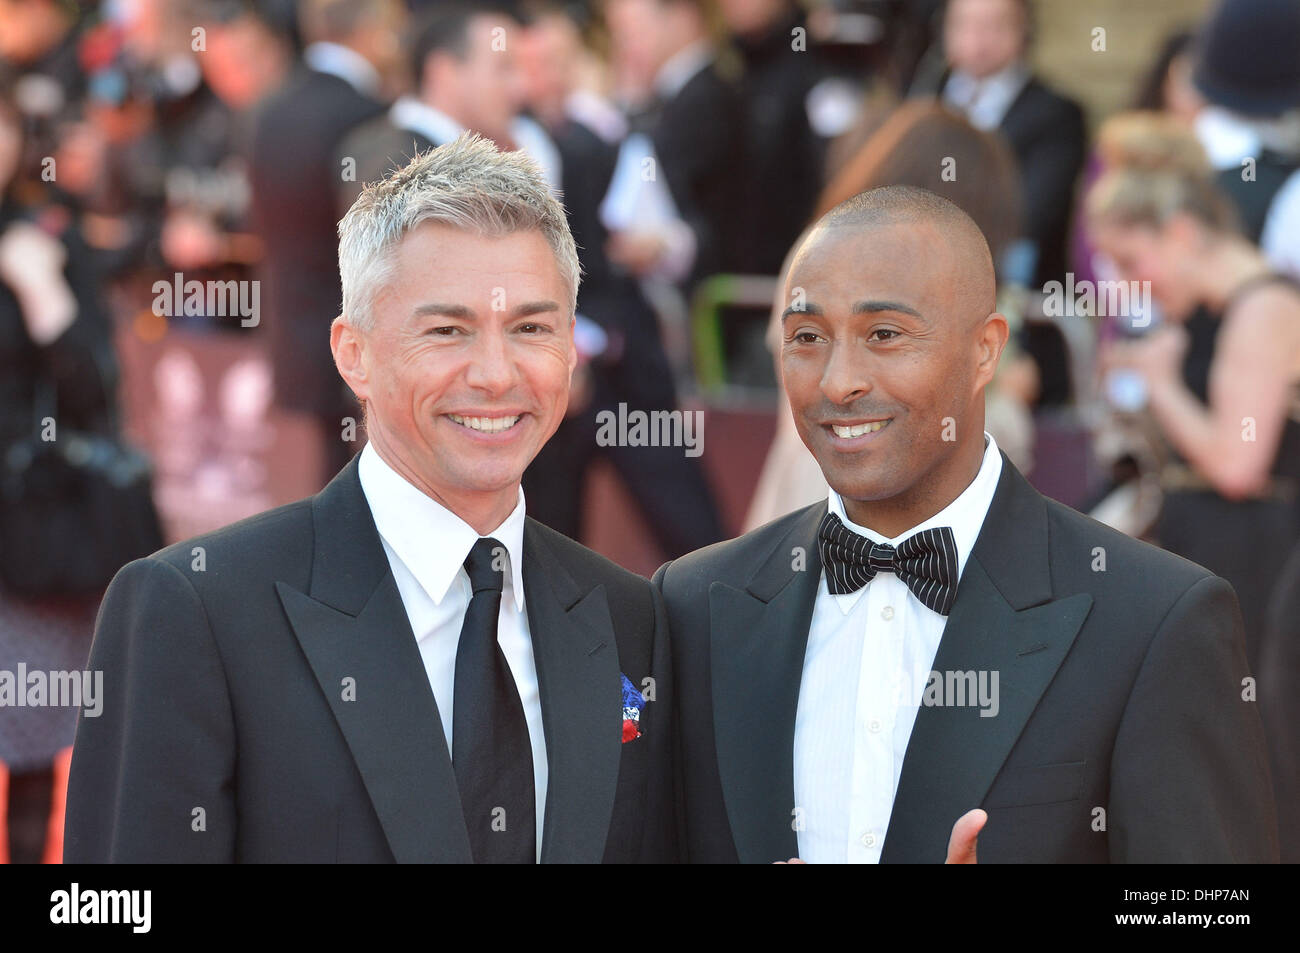 Jonathan Edwards and Colin Jackson 'Our Great Team Rises' held at the Royal Albert Hall - Arrivals London, England - 11.05.12 Stock Photo